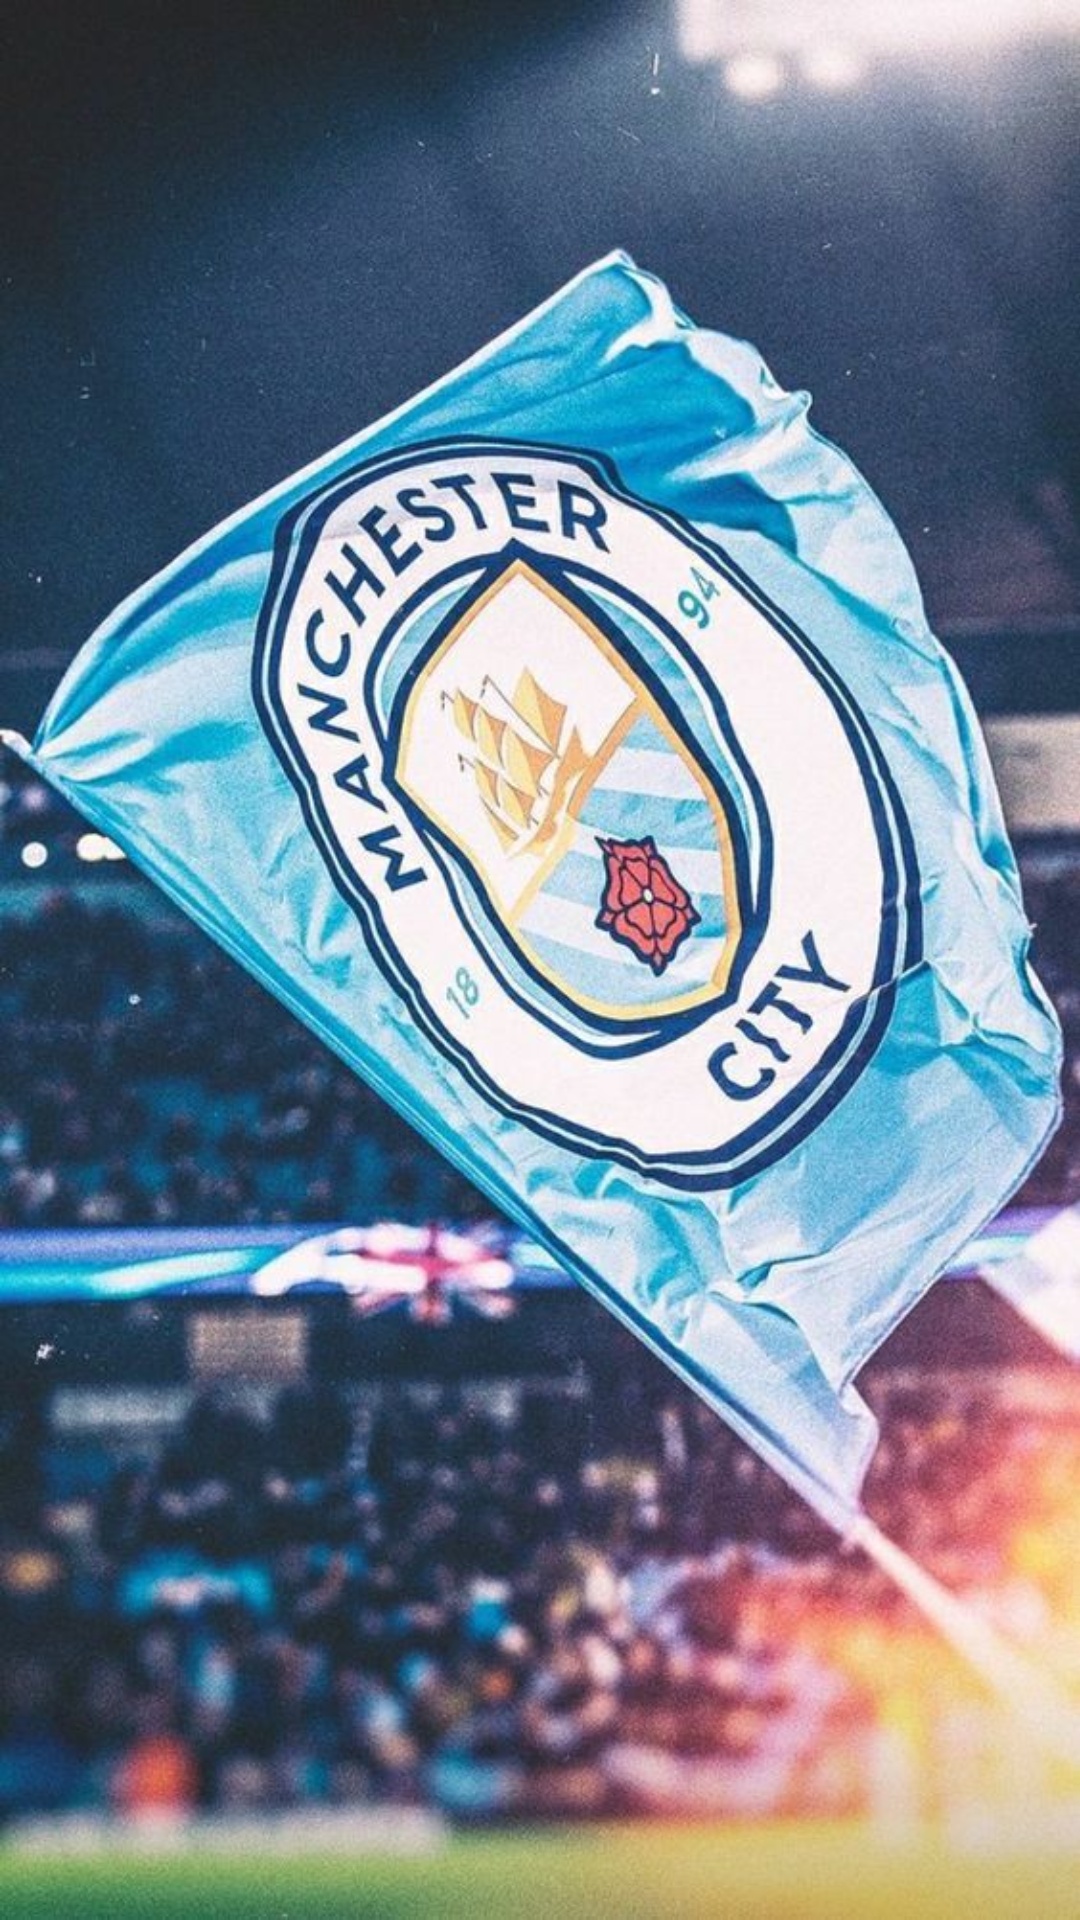 100+] Manchester City Fc Wallpapers